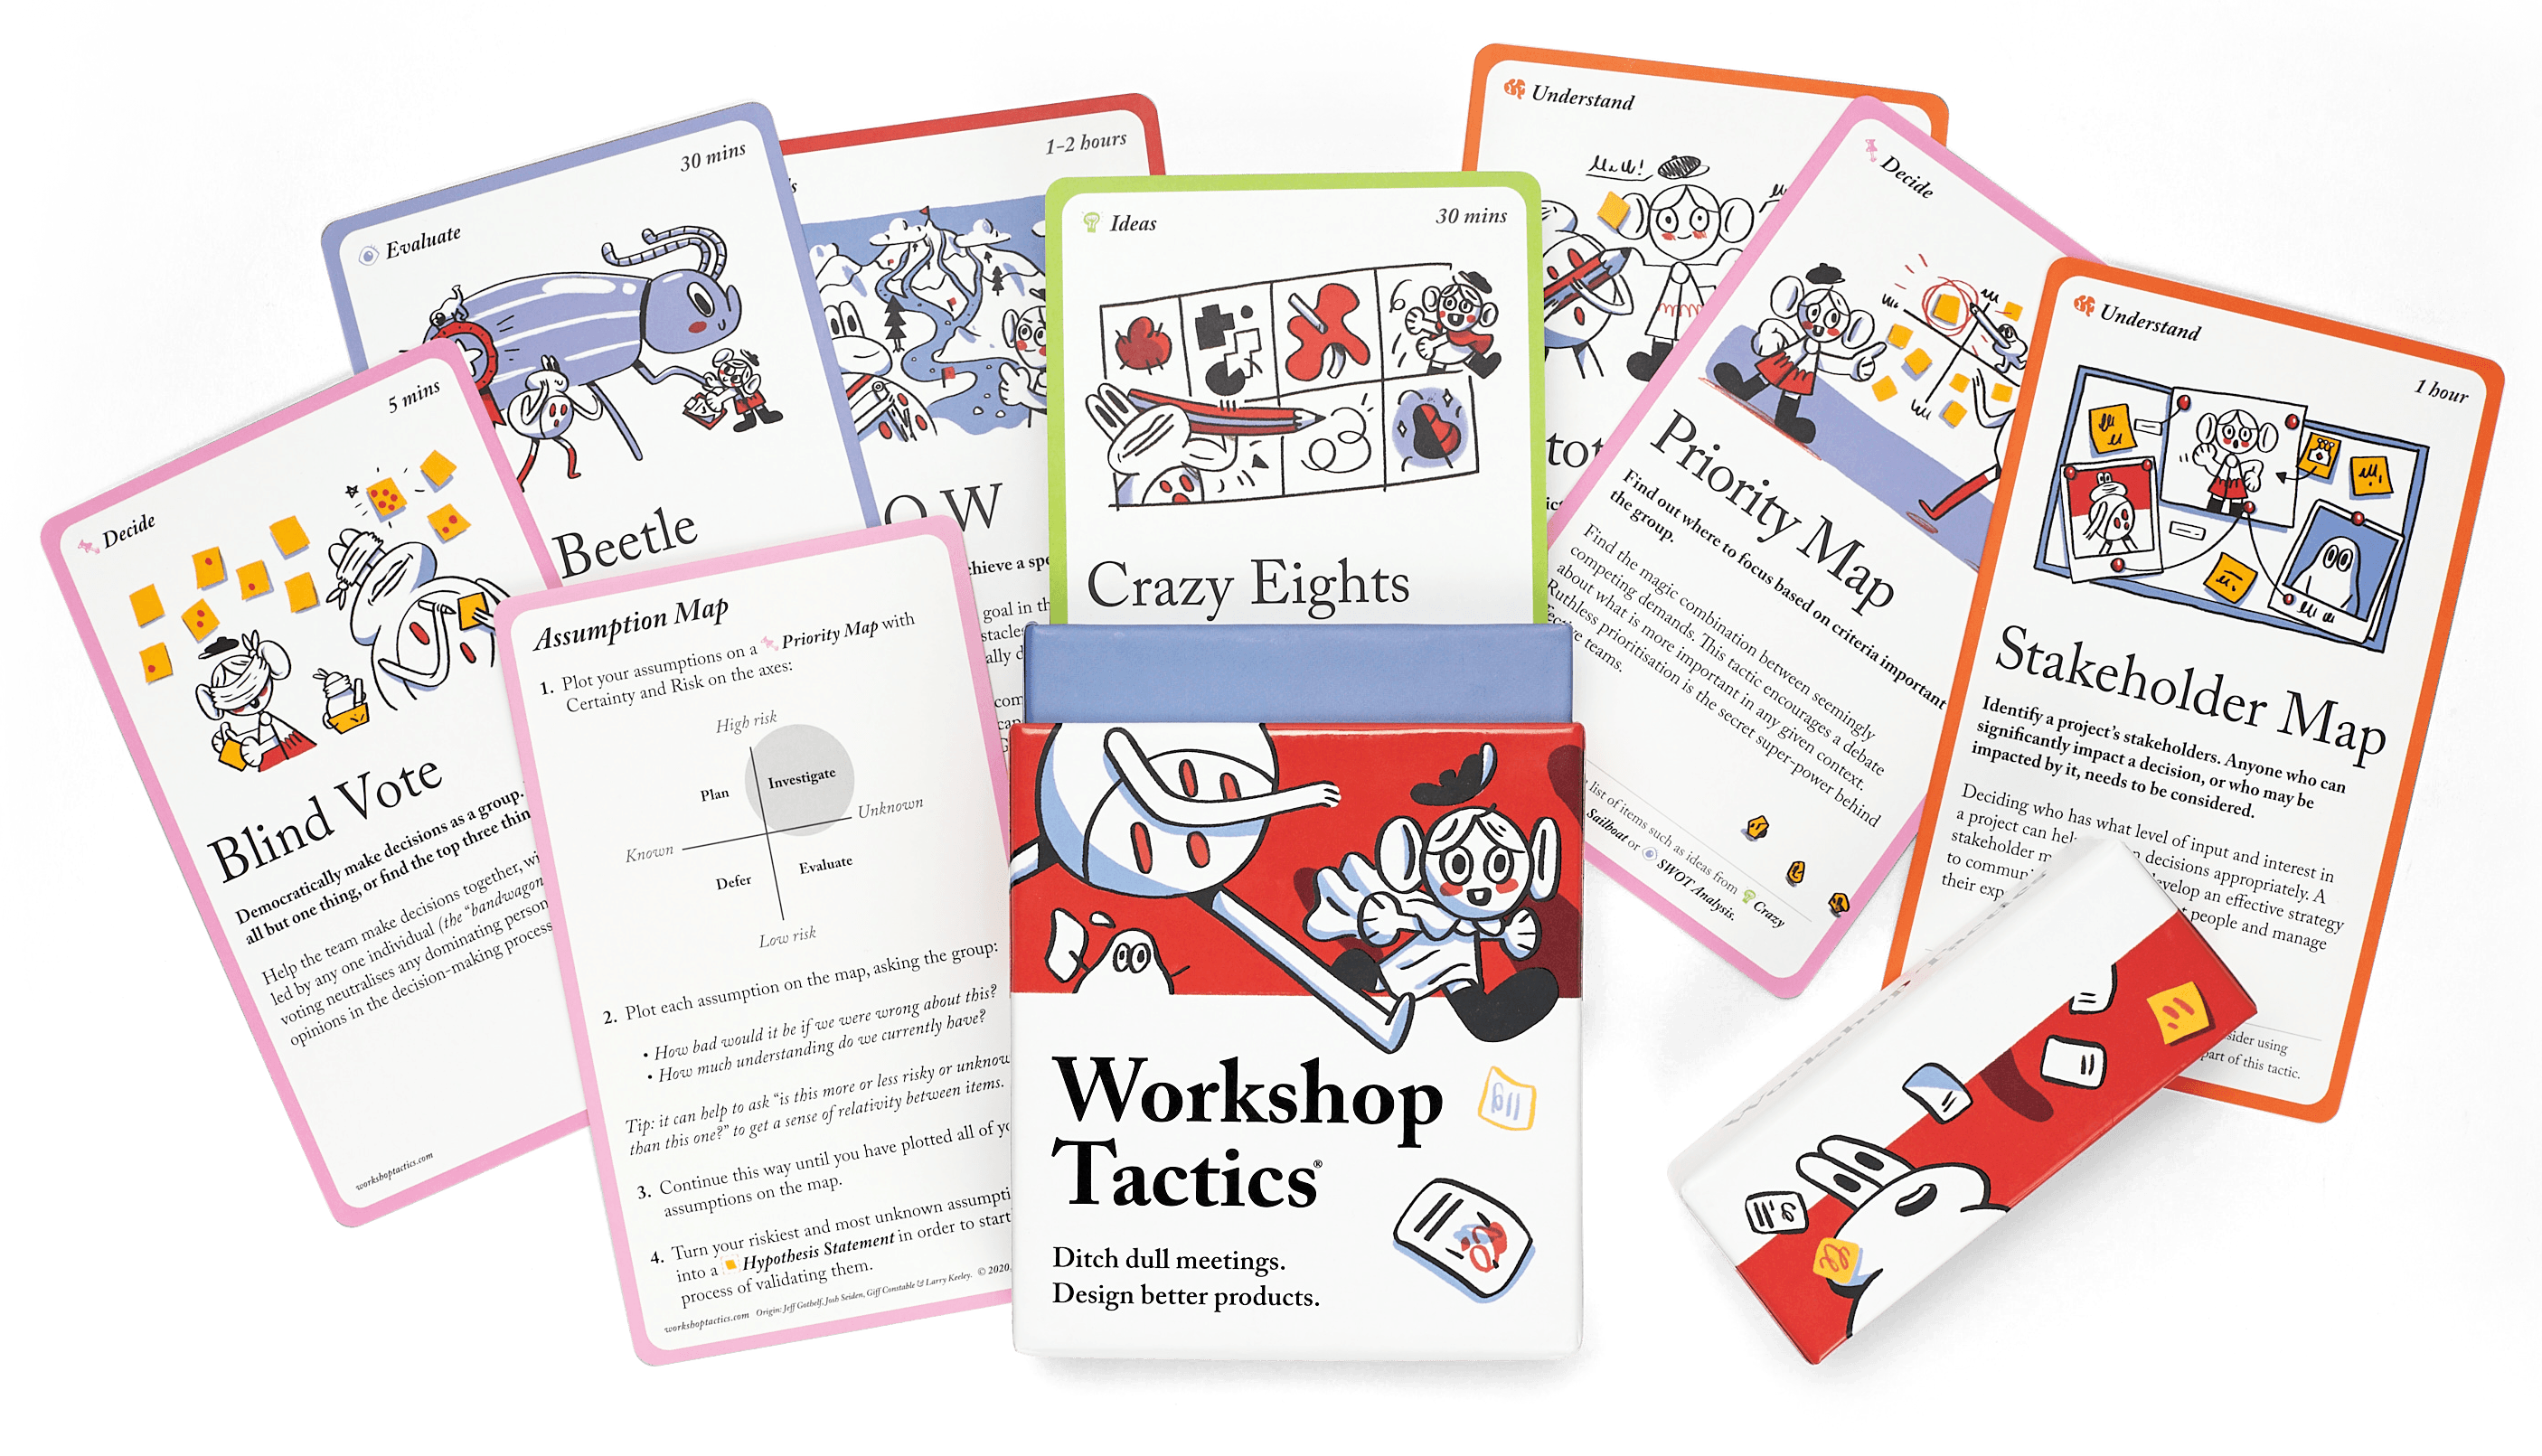 The Workshop Tactics cards are great for planning ideation sessions away from your screen.